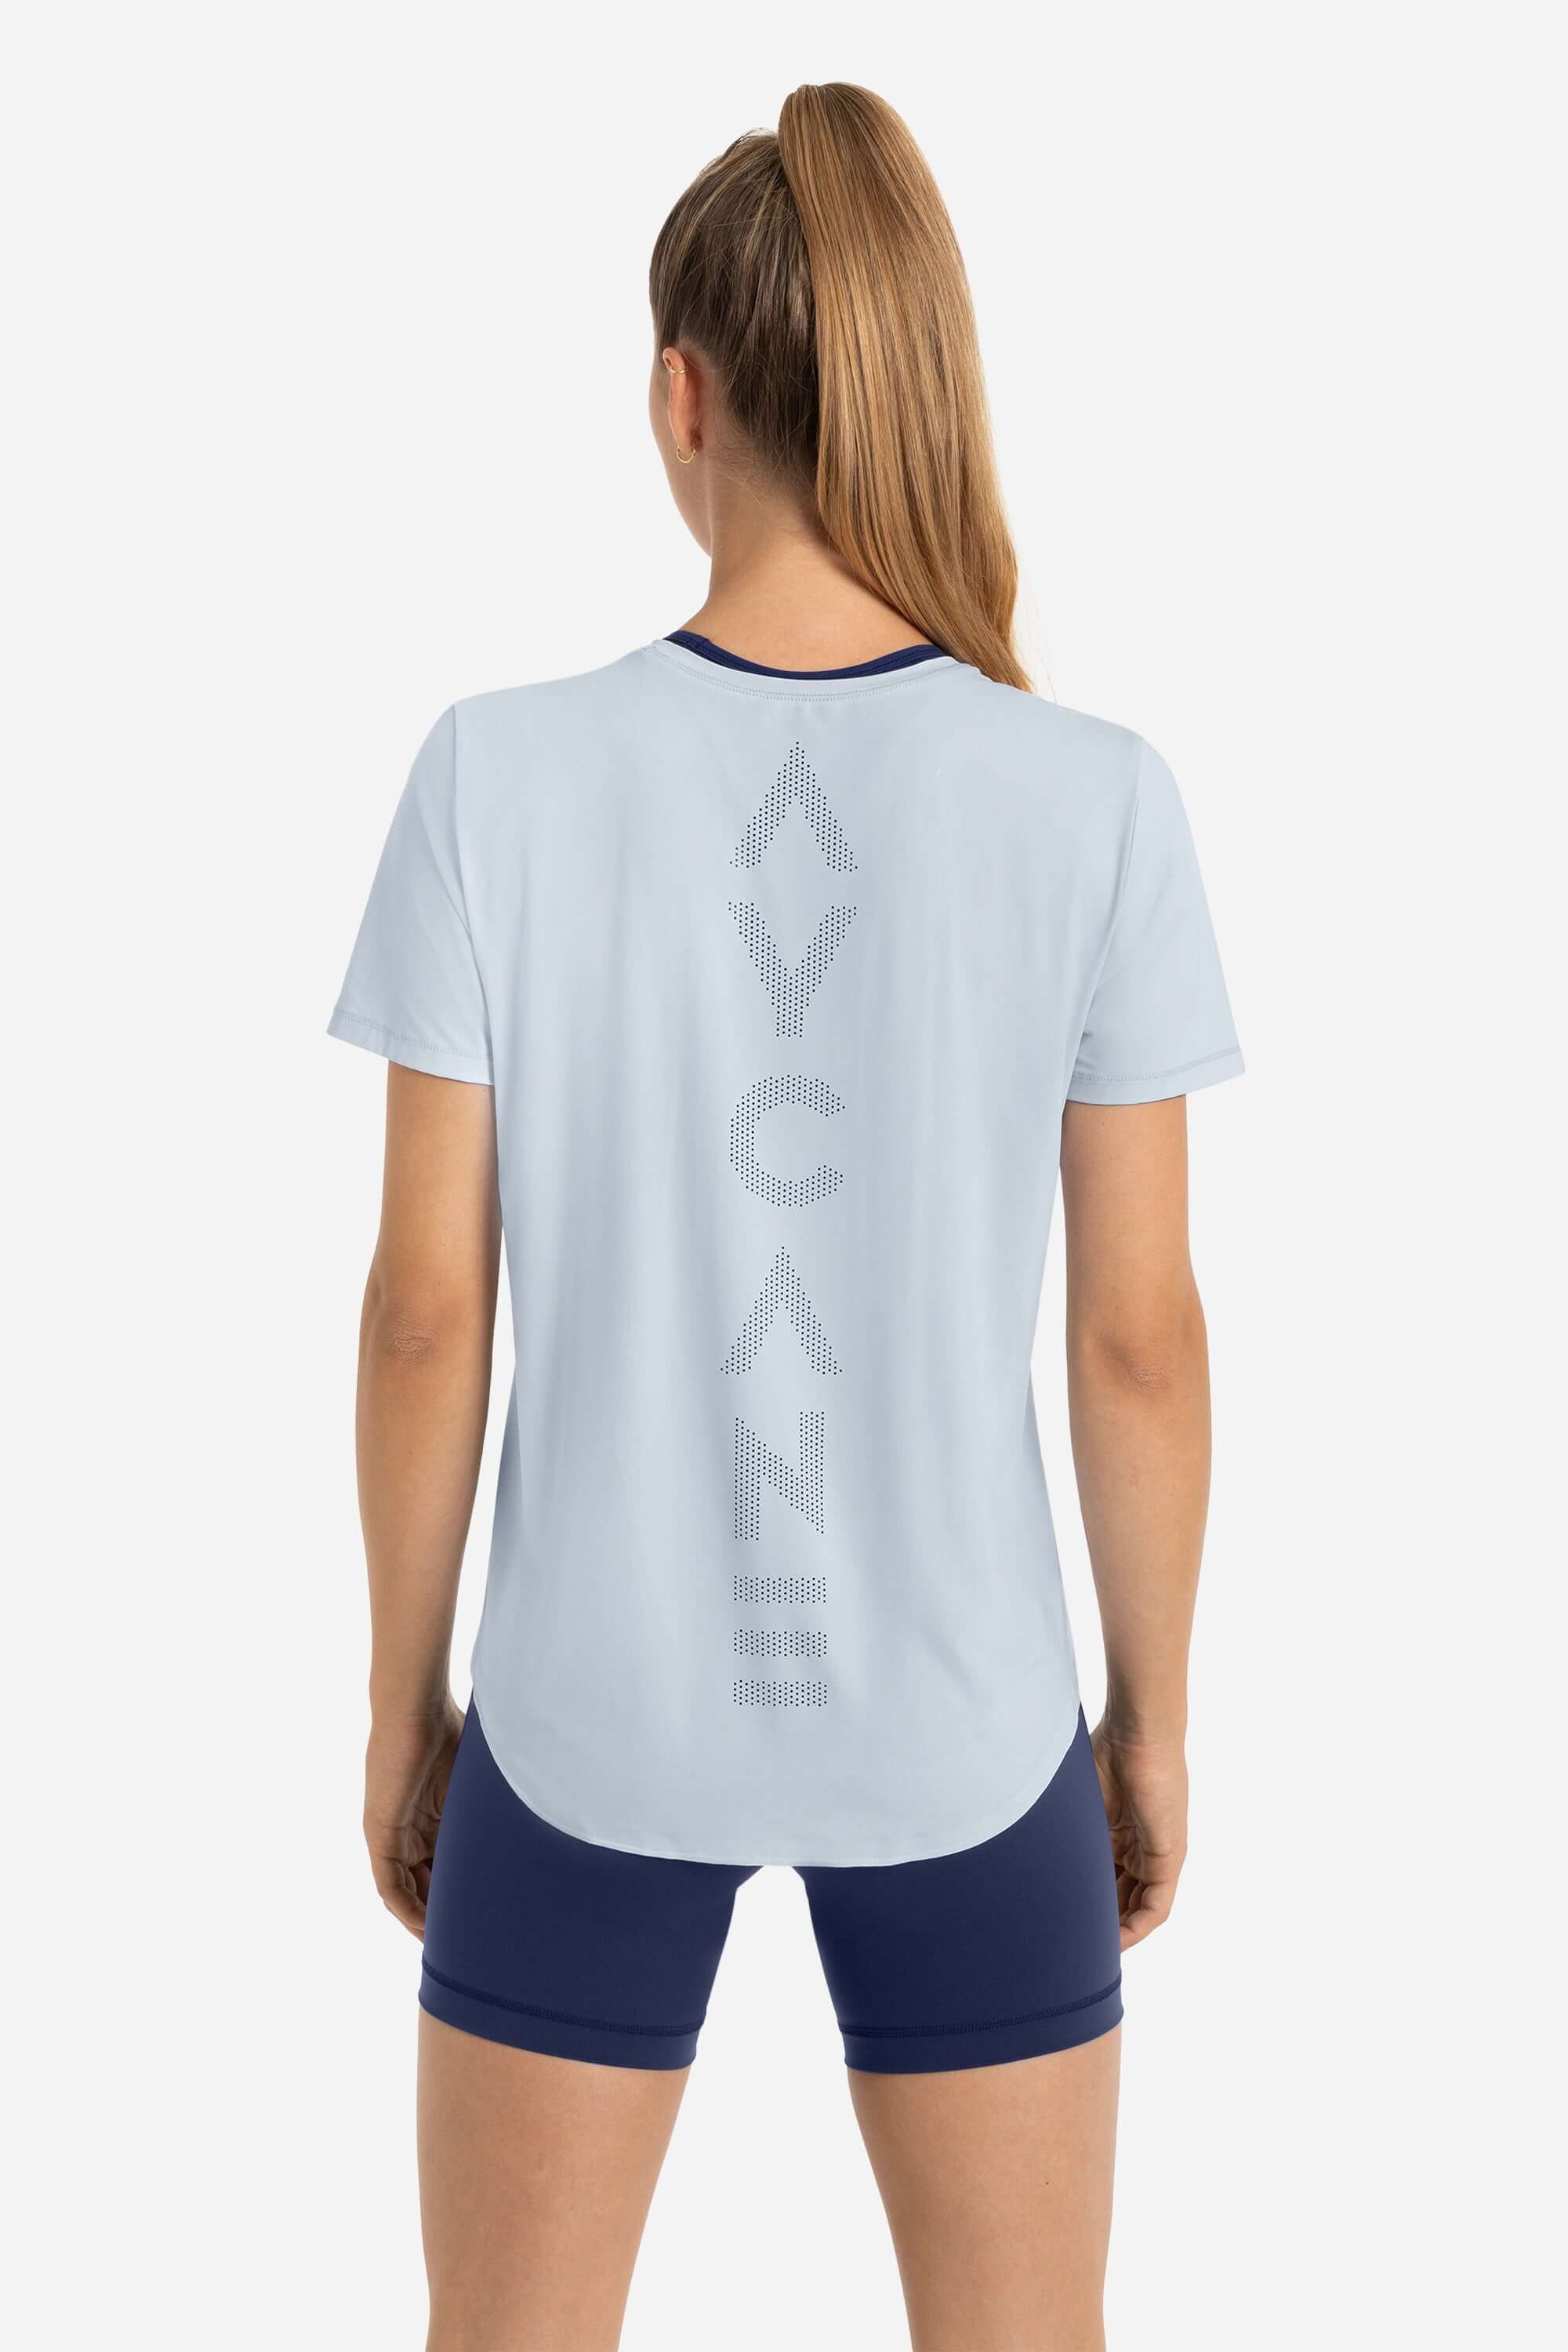 Women wearing a training t-shirt short sleeve in blue with short tights in blue from AYCANE